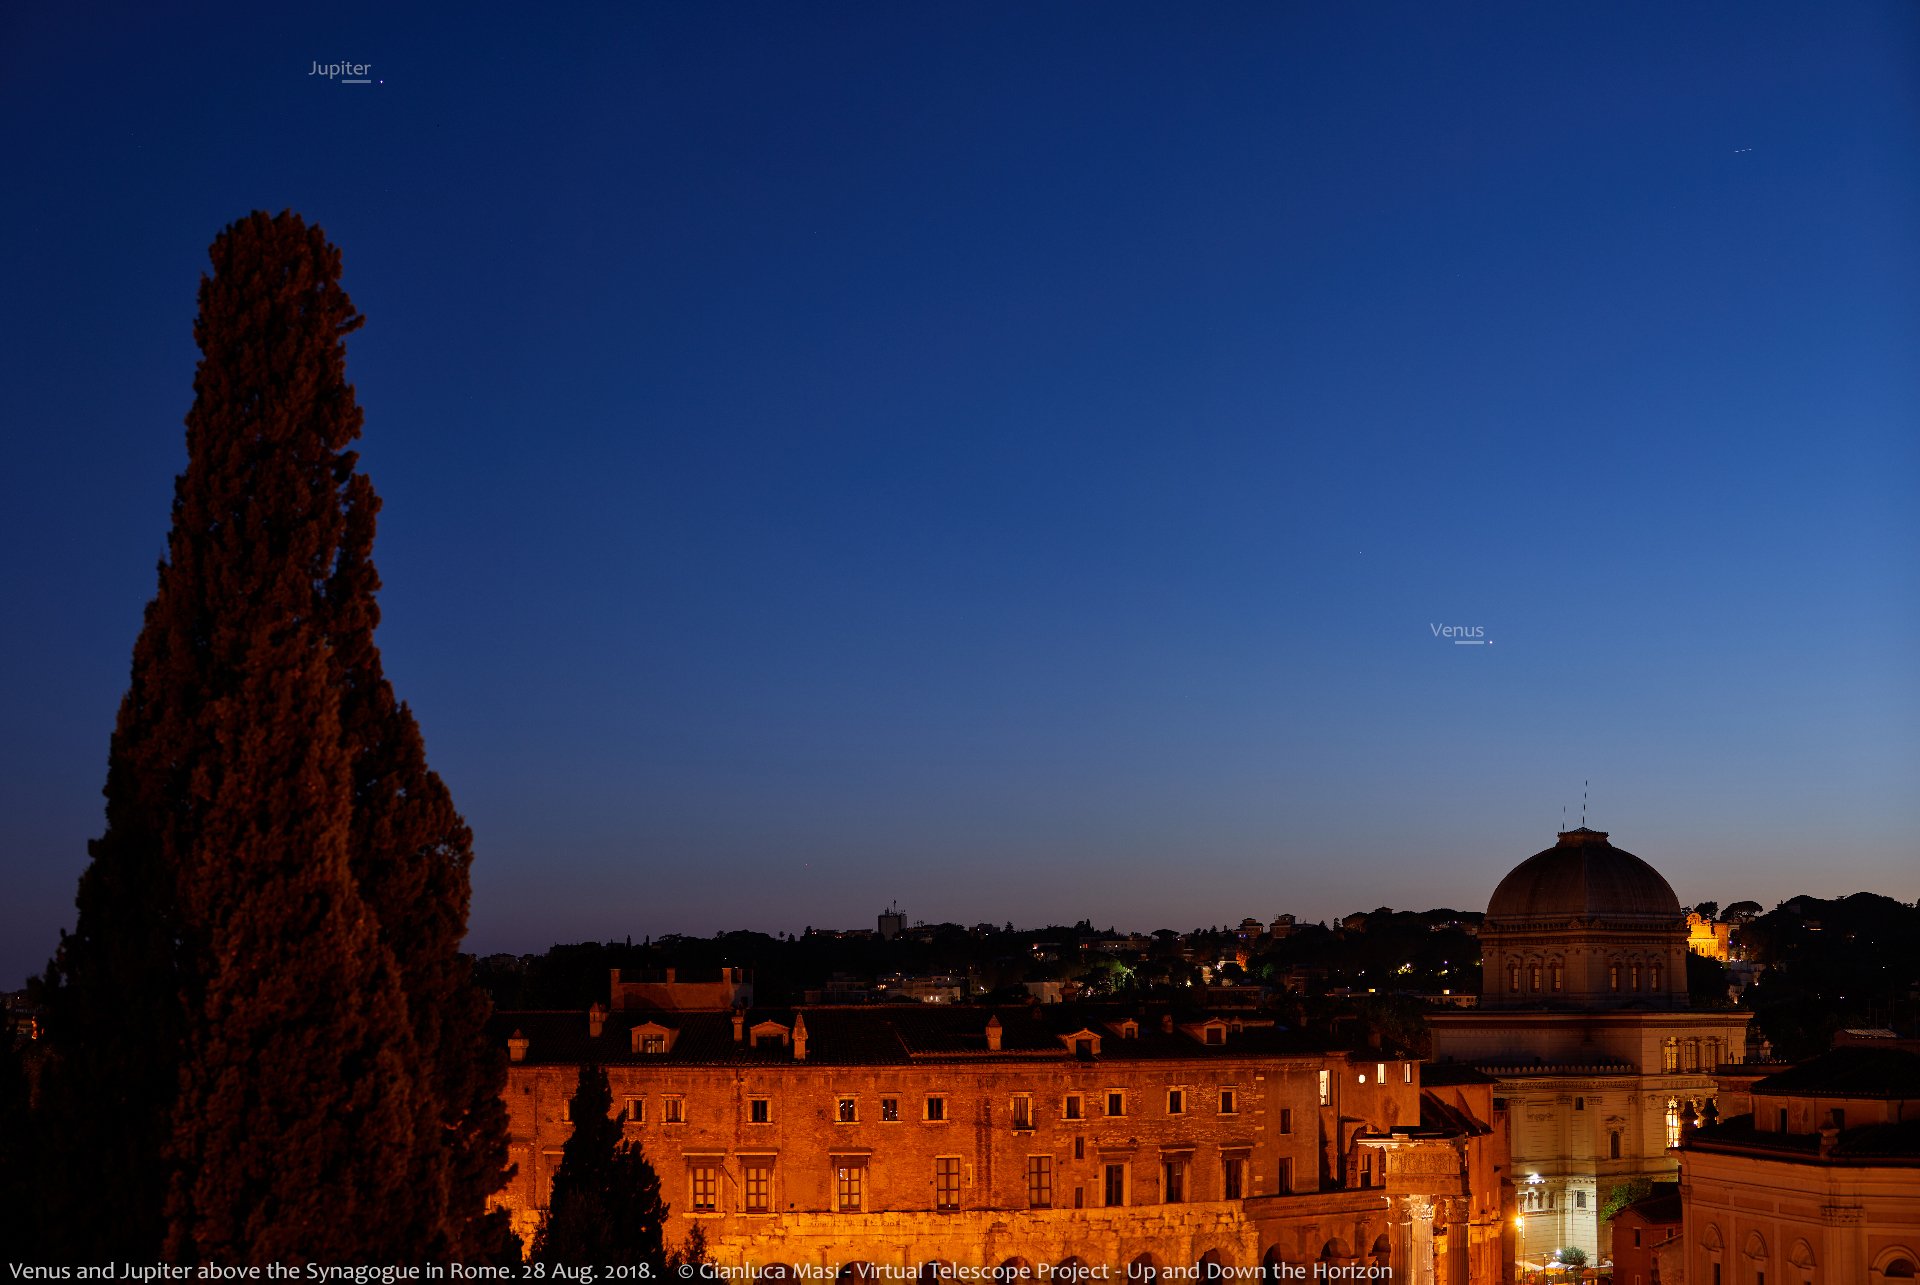 Venus and Jupiter shining above the Synagogue in Rome, at sunset - 28 Aug. 2018